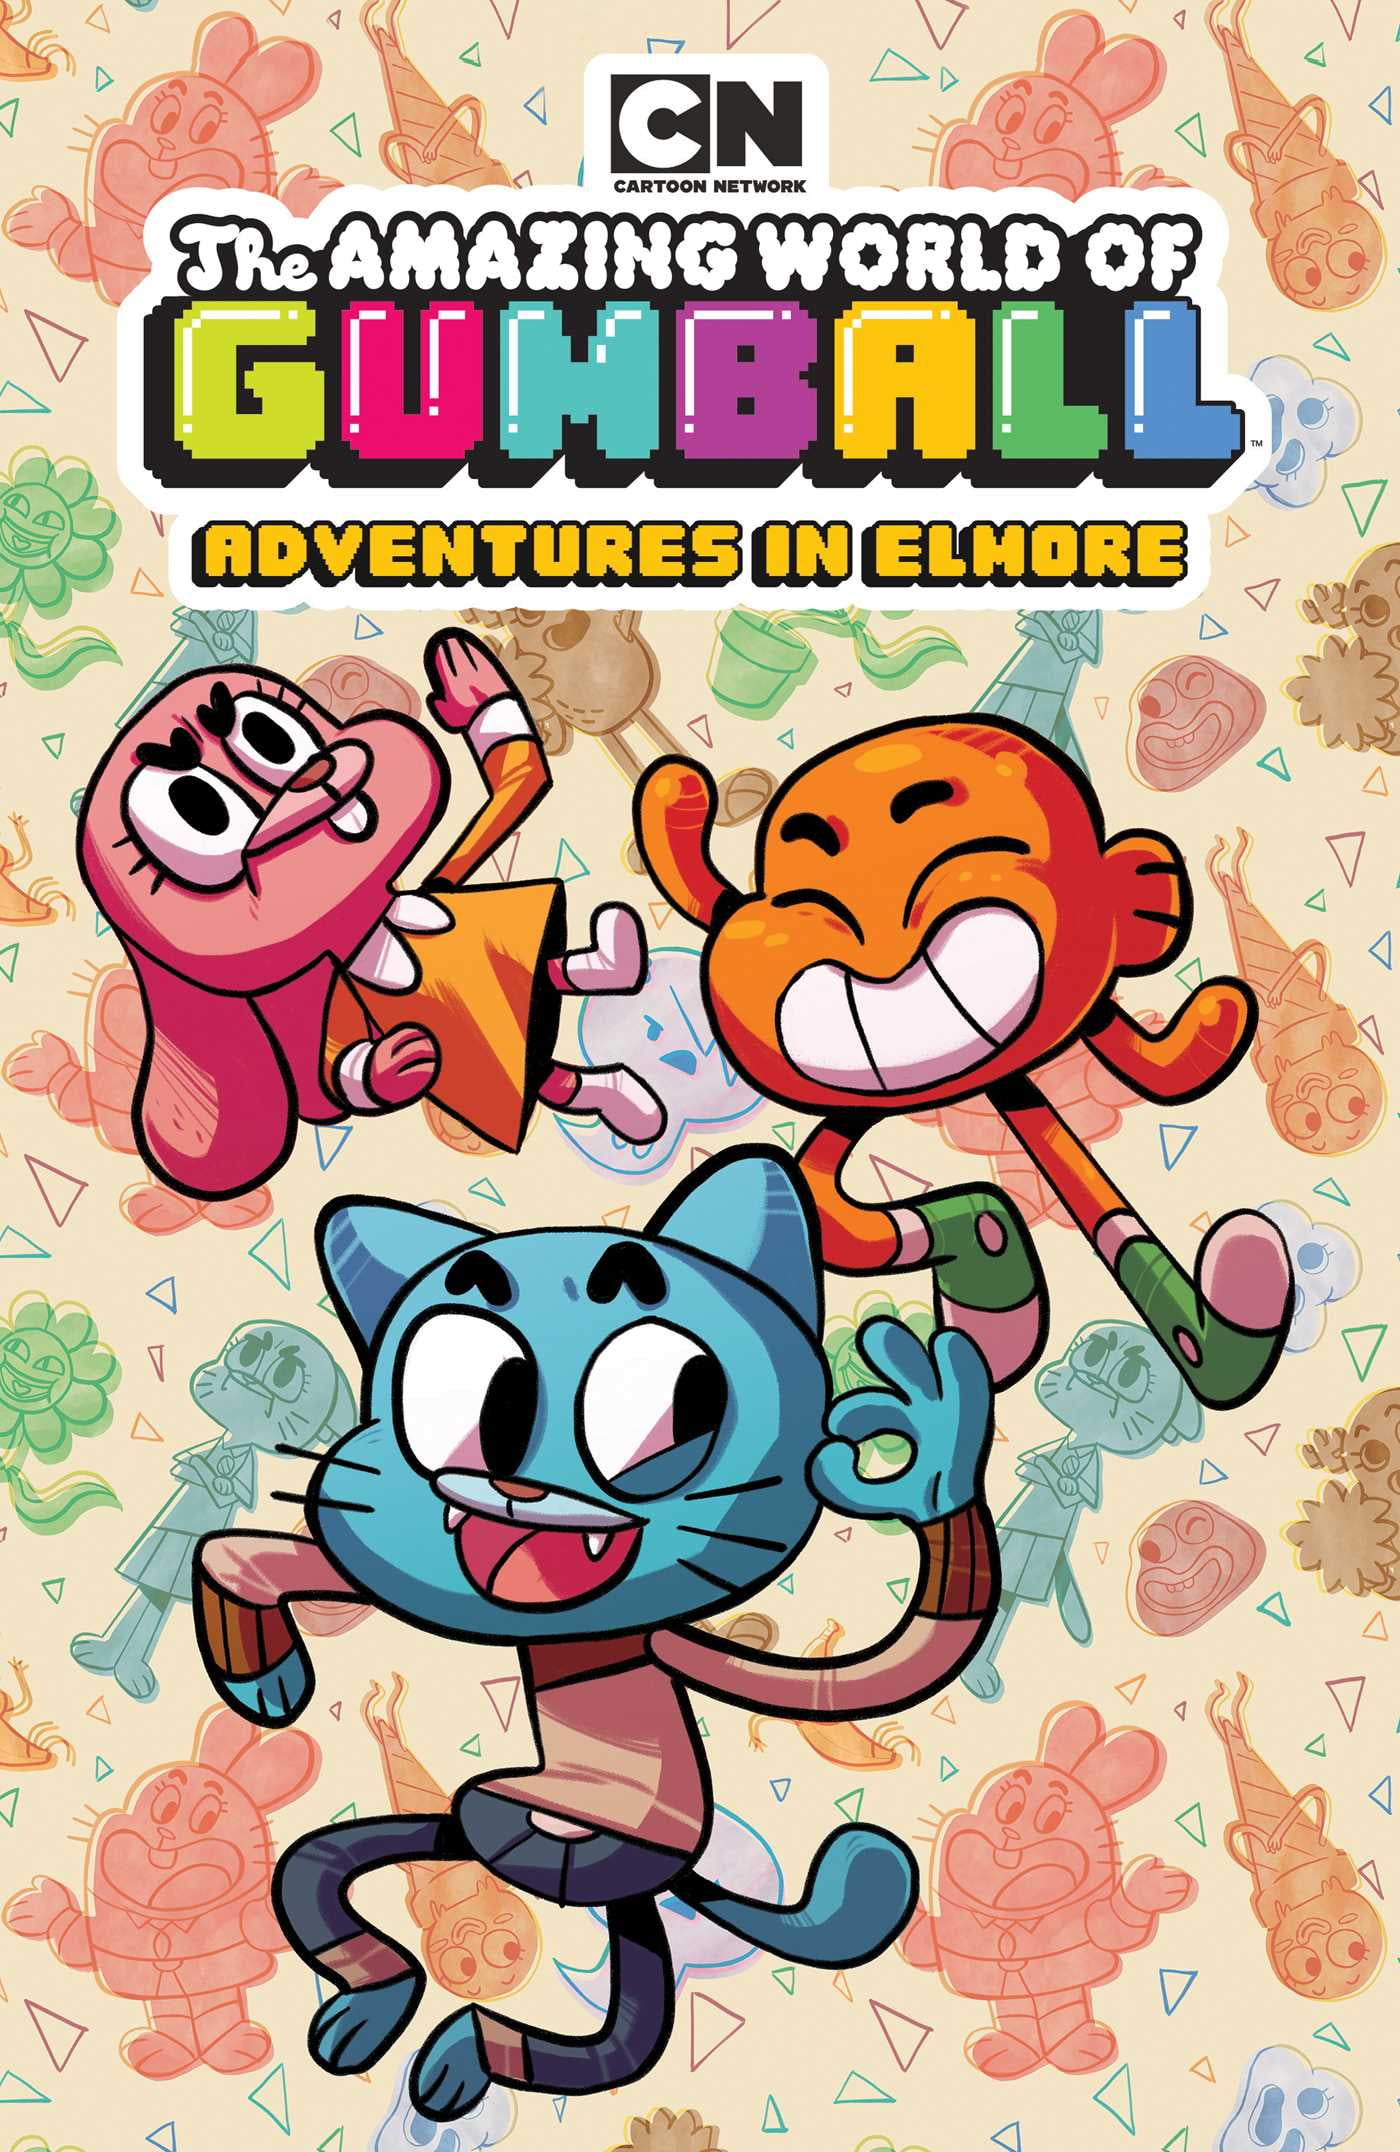 The Parody World of Gumball Poster! : r/gumball